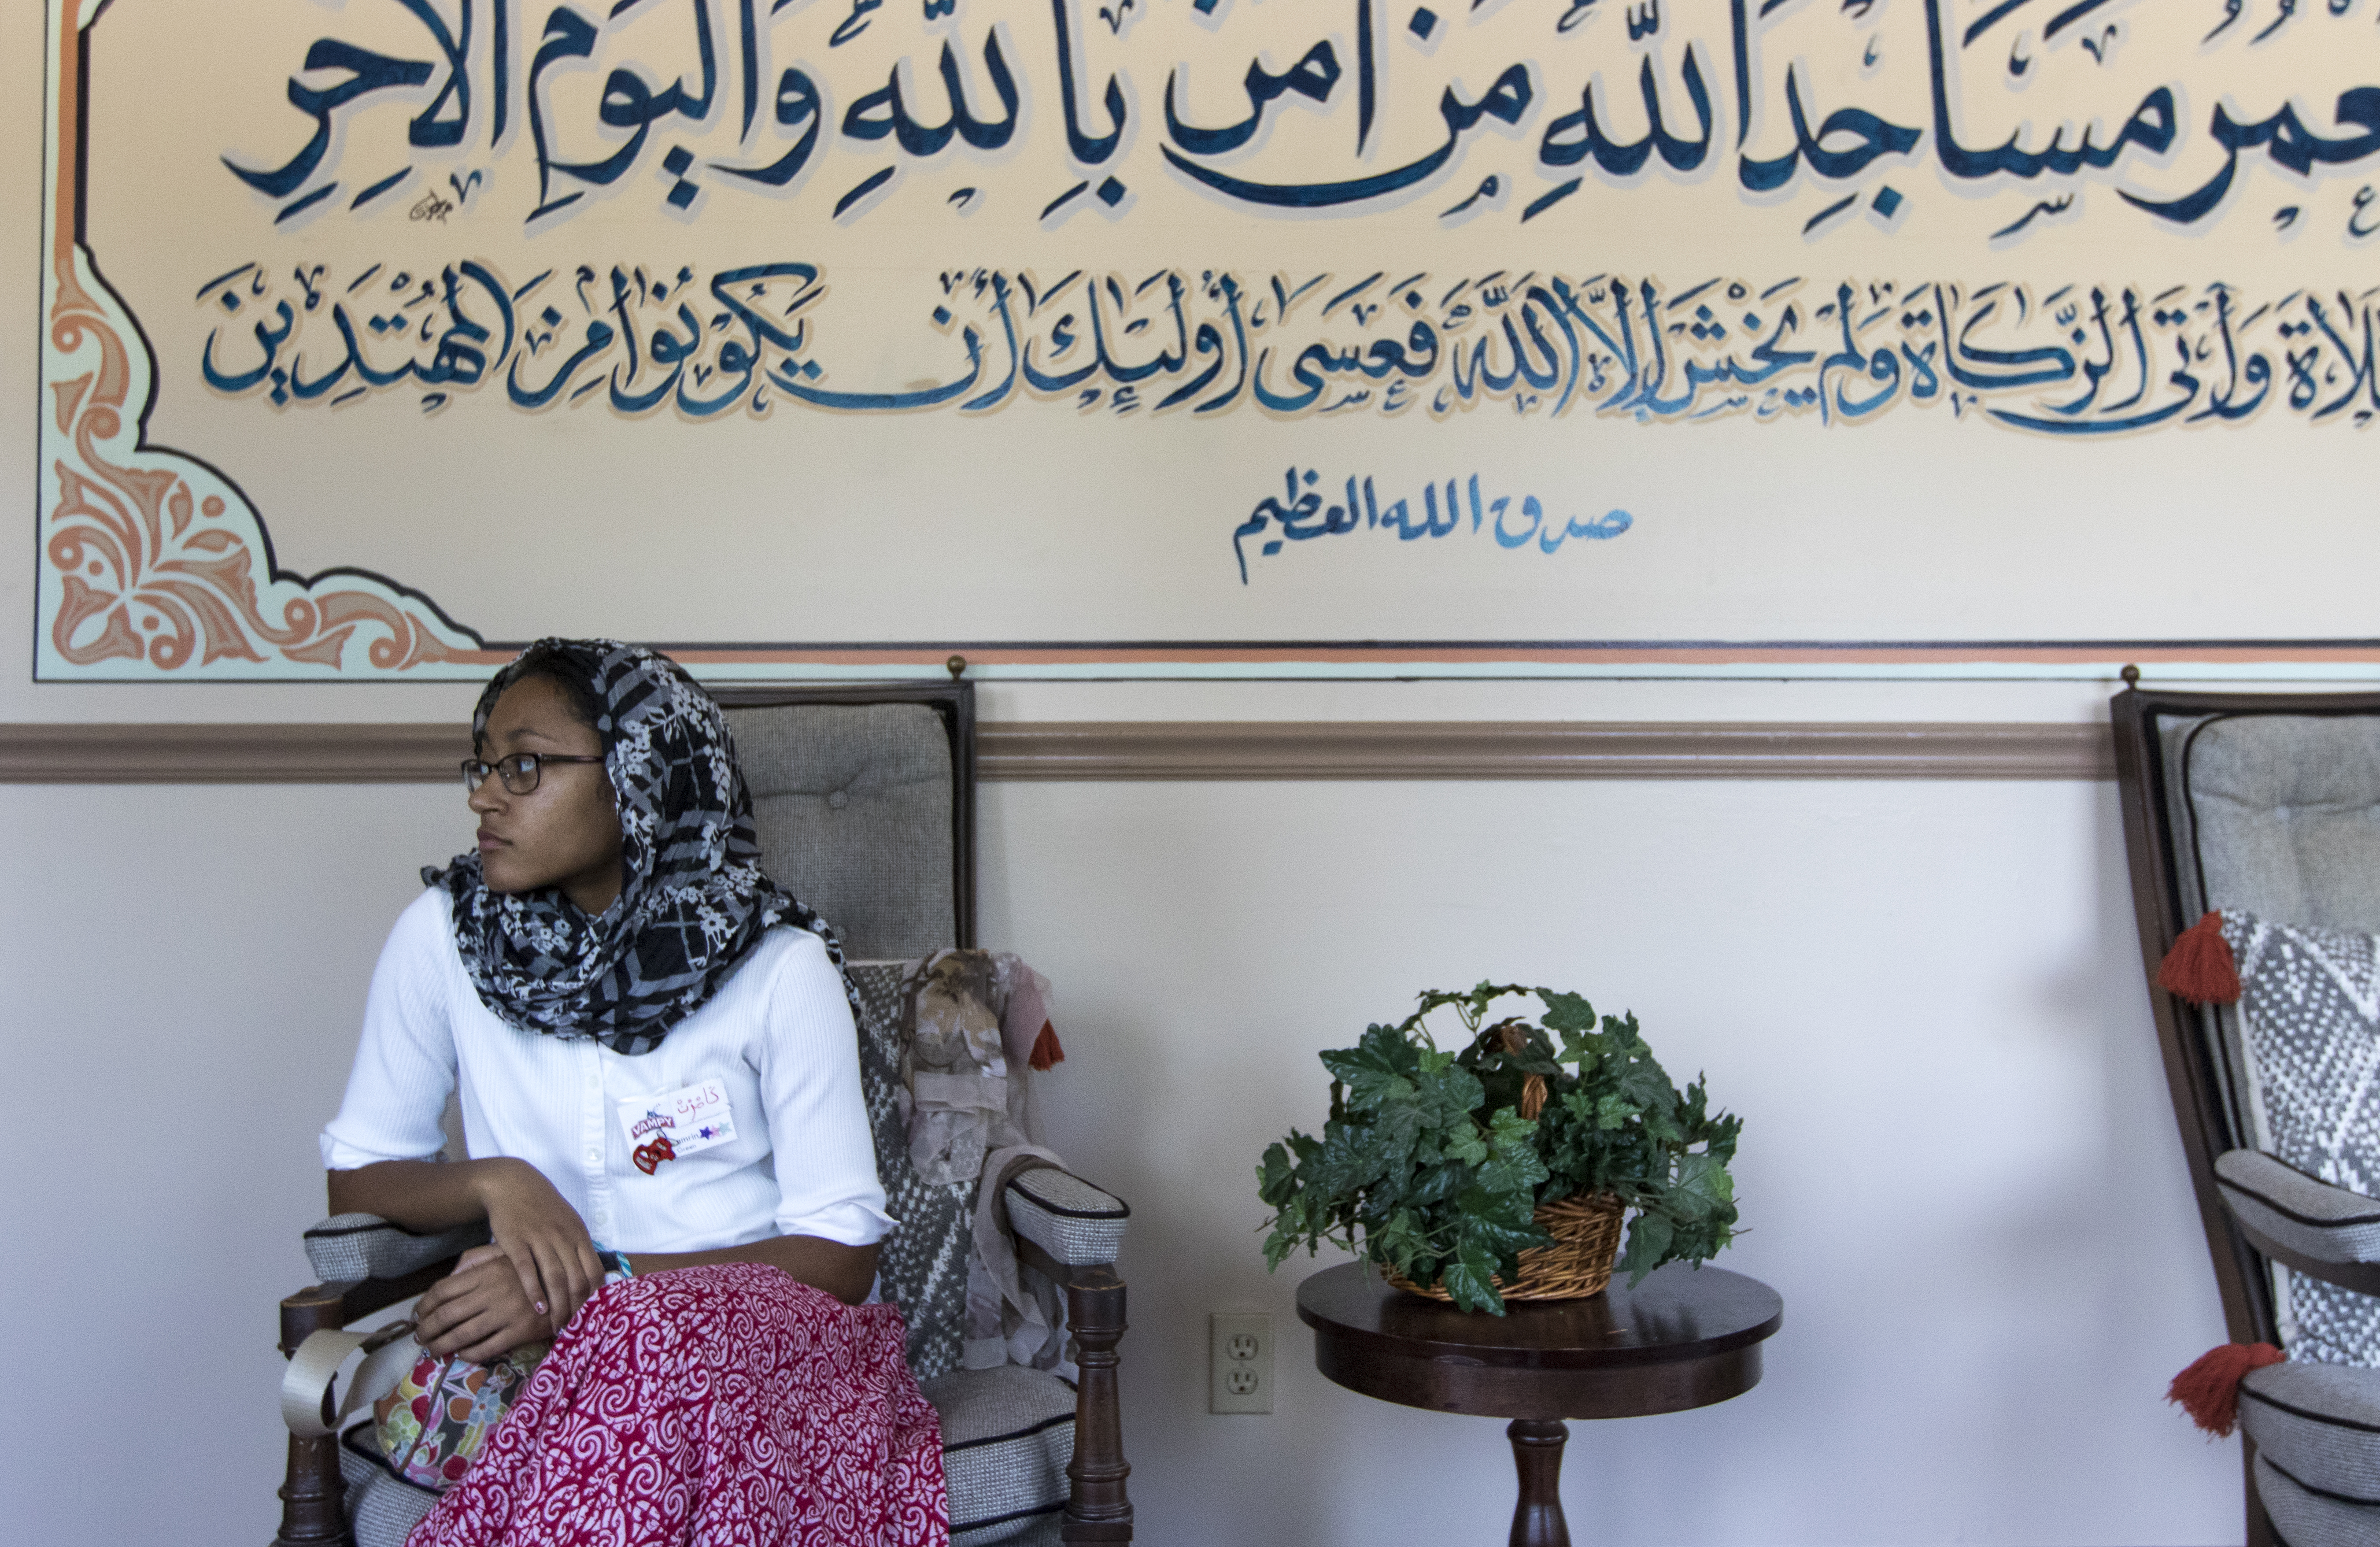 Kamrin Green of Bowling Green sits in the lobby of the Muslim American Cultural Center in Nashville Tuesday, July 11. Students had the opportunity to practice their Arabic as well as learn new words and phrases during their field trip. (Photo by Brook Joyner)